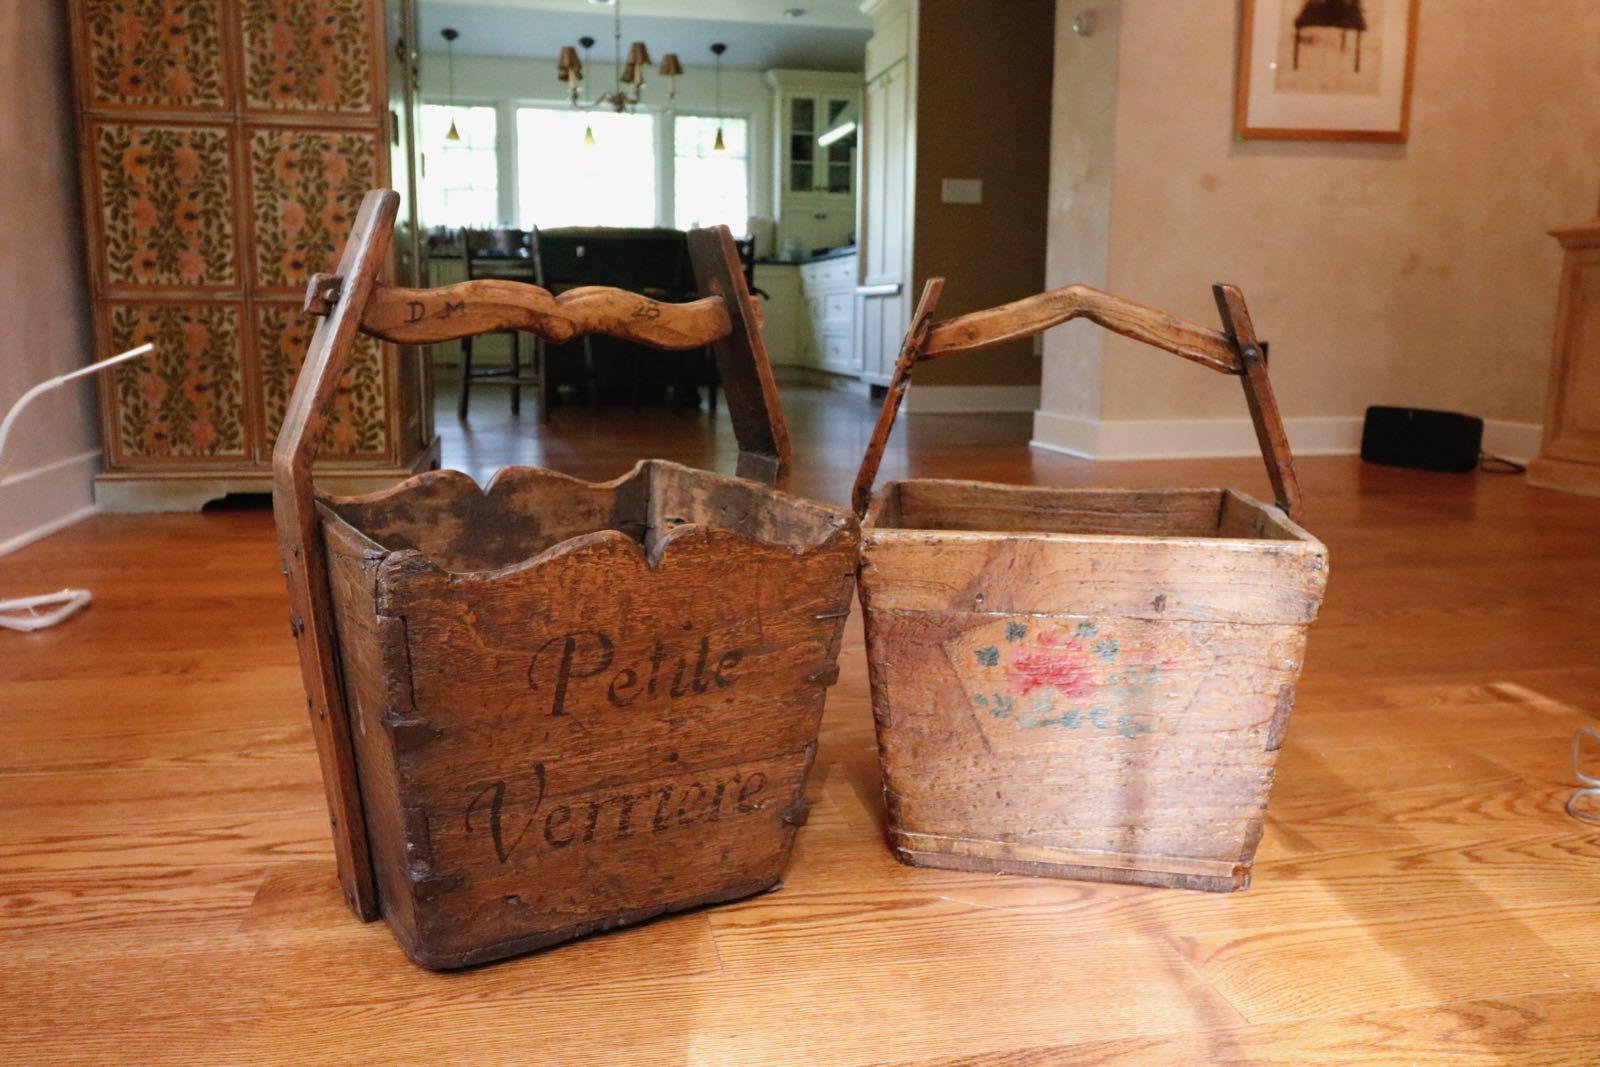 Provence Alpes Cote d'Azur Hand Made Petite Verrier Reclaimed Wood Carriers Box 4